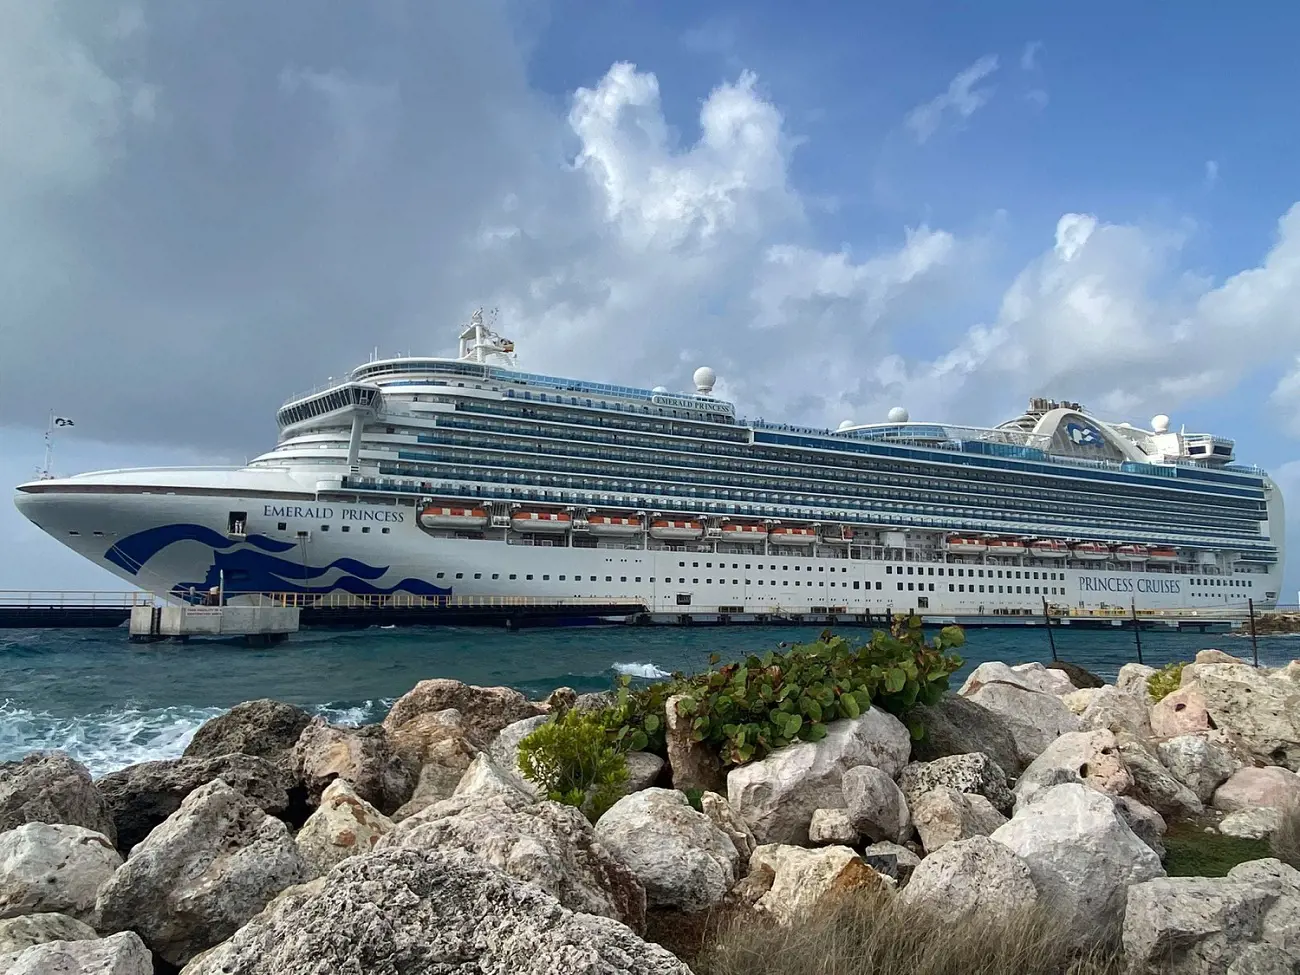 Emerald Princess from the Princess Cruises Corporation was built by	Fincantieri in Italy